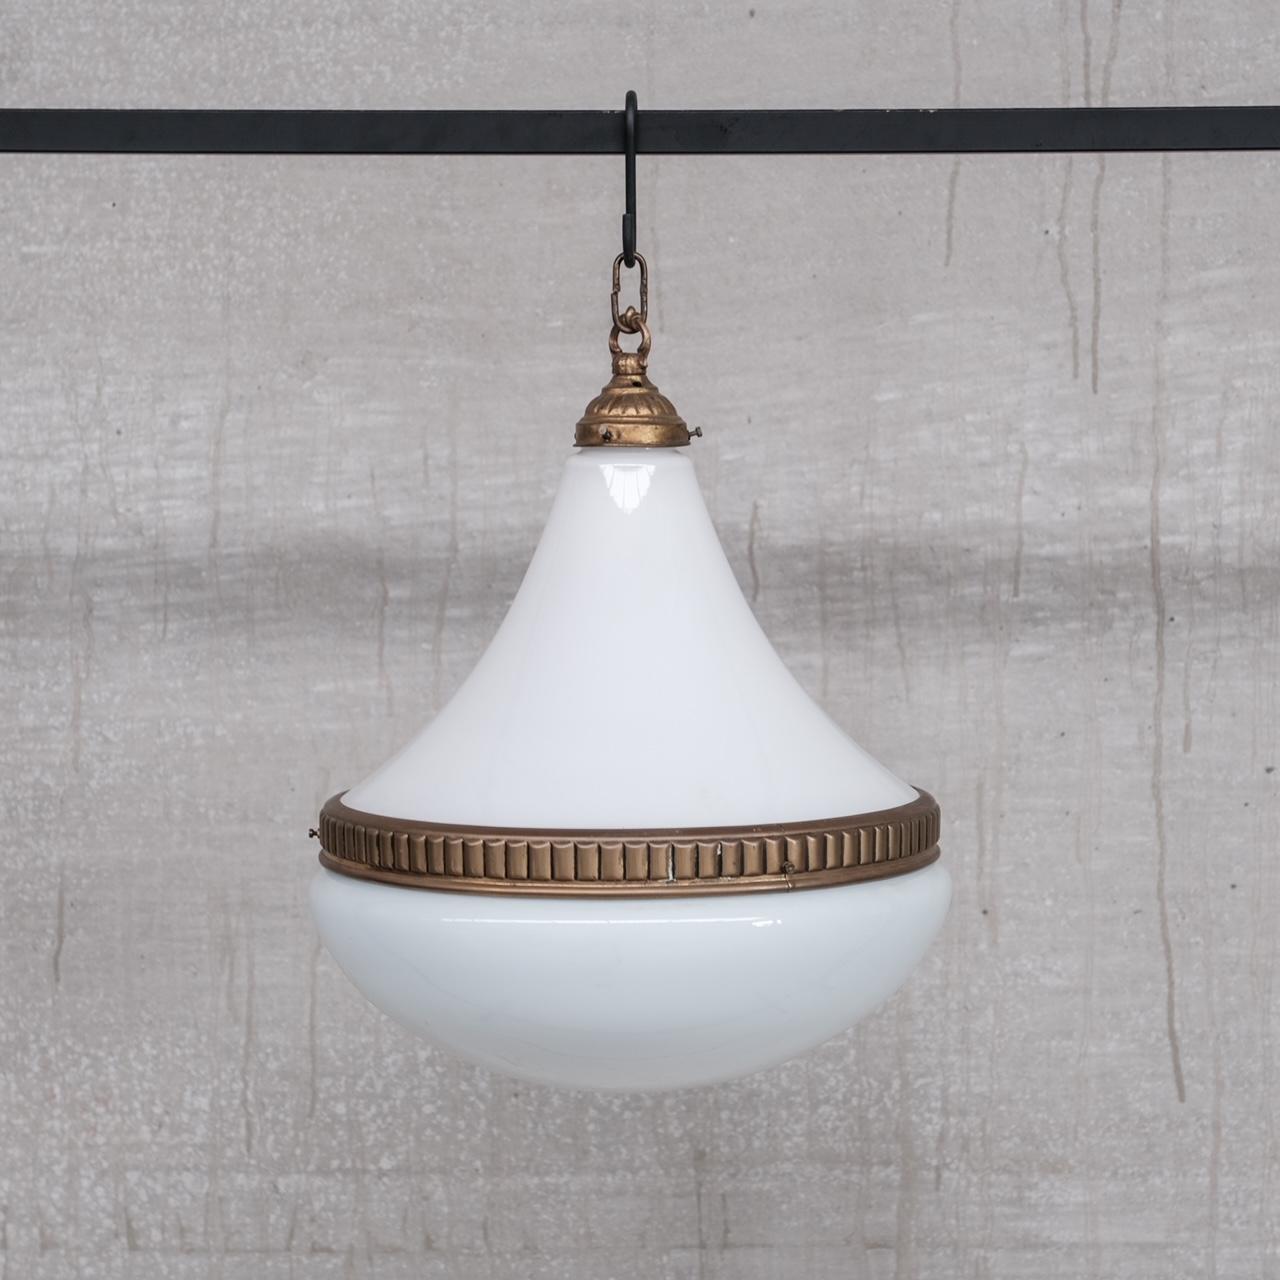 A large sized opaline pendant light, with delicate brass gallery and ribbed brass rim. 

France, c1960s. 

No original chain or ceiling roses were retained. But these are easy to source online. 

Remain in good condition, since re-wired and